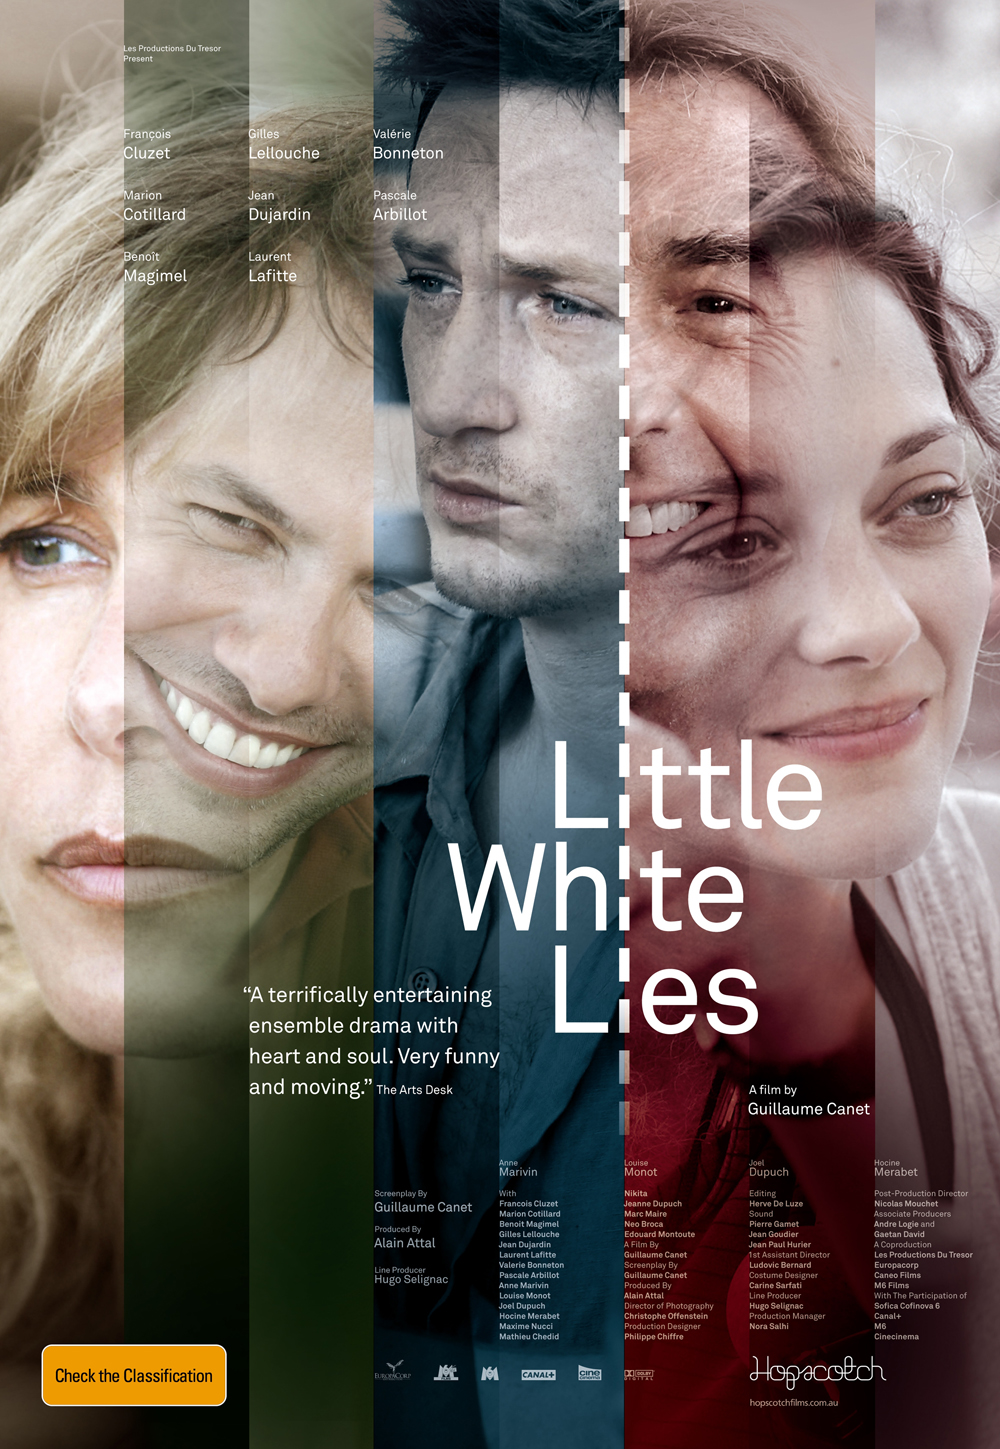 LITTLE WHITE LIES Available Feb. 5th on Blu-ray/DVD